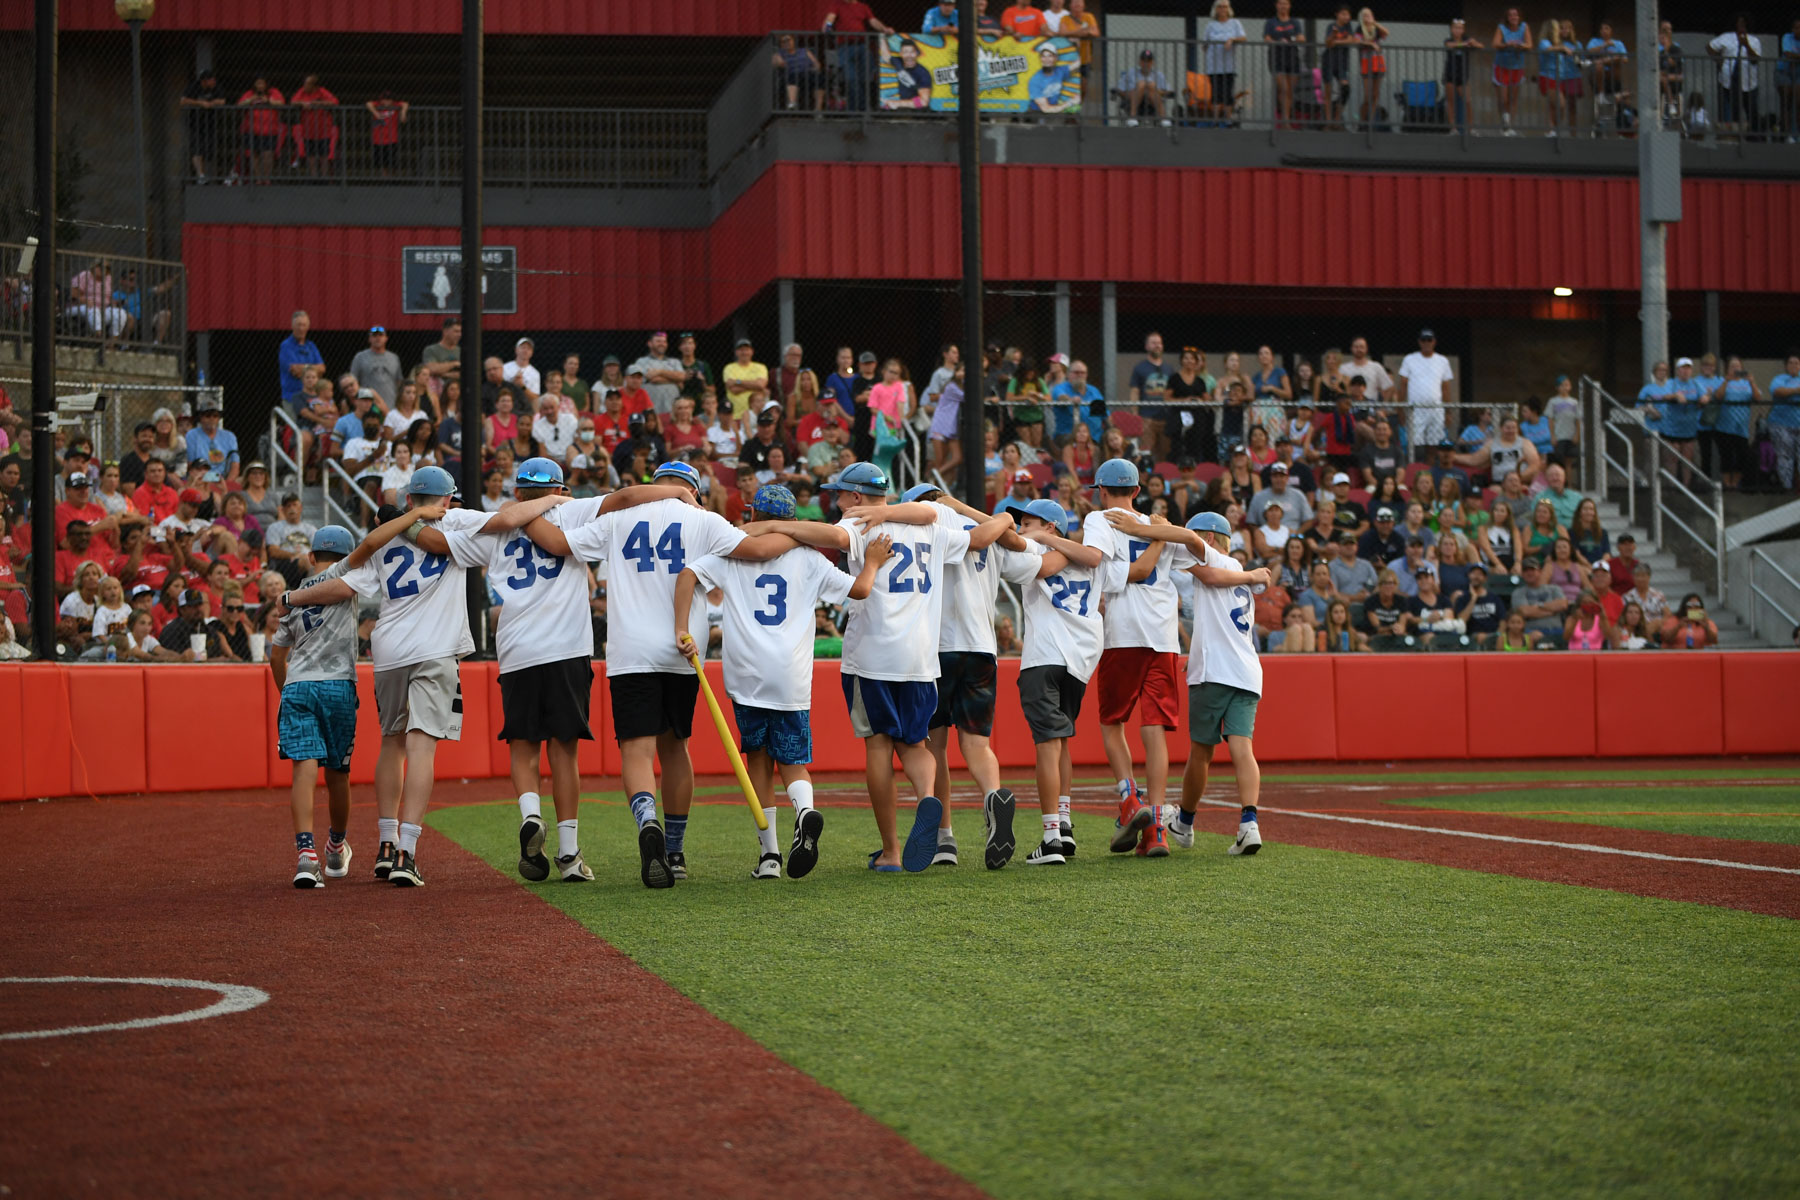 A team of youth travel baseball players have their arms around each other's shoulders as they walk off a baseball field. The players are wearing white jerseys with blue numbers.